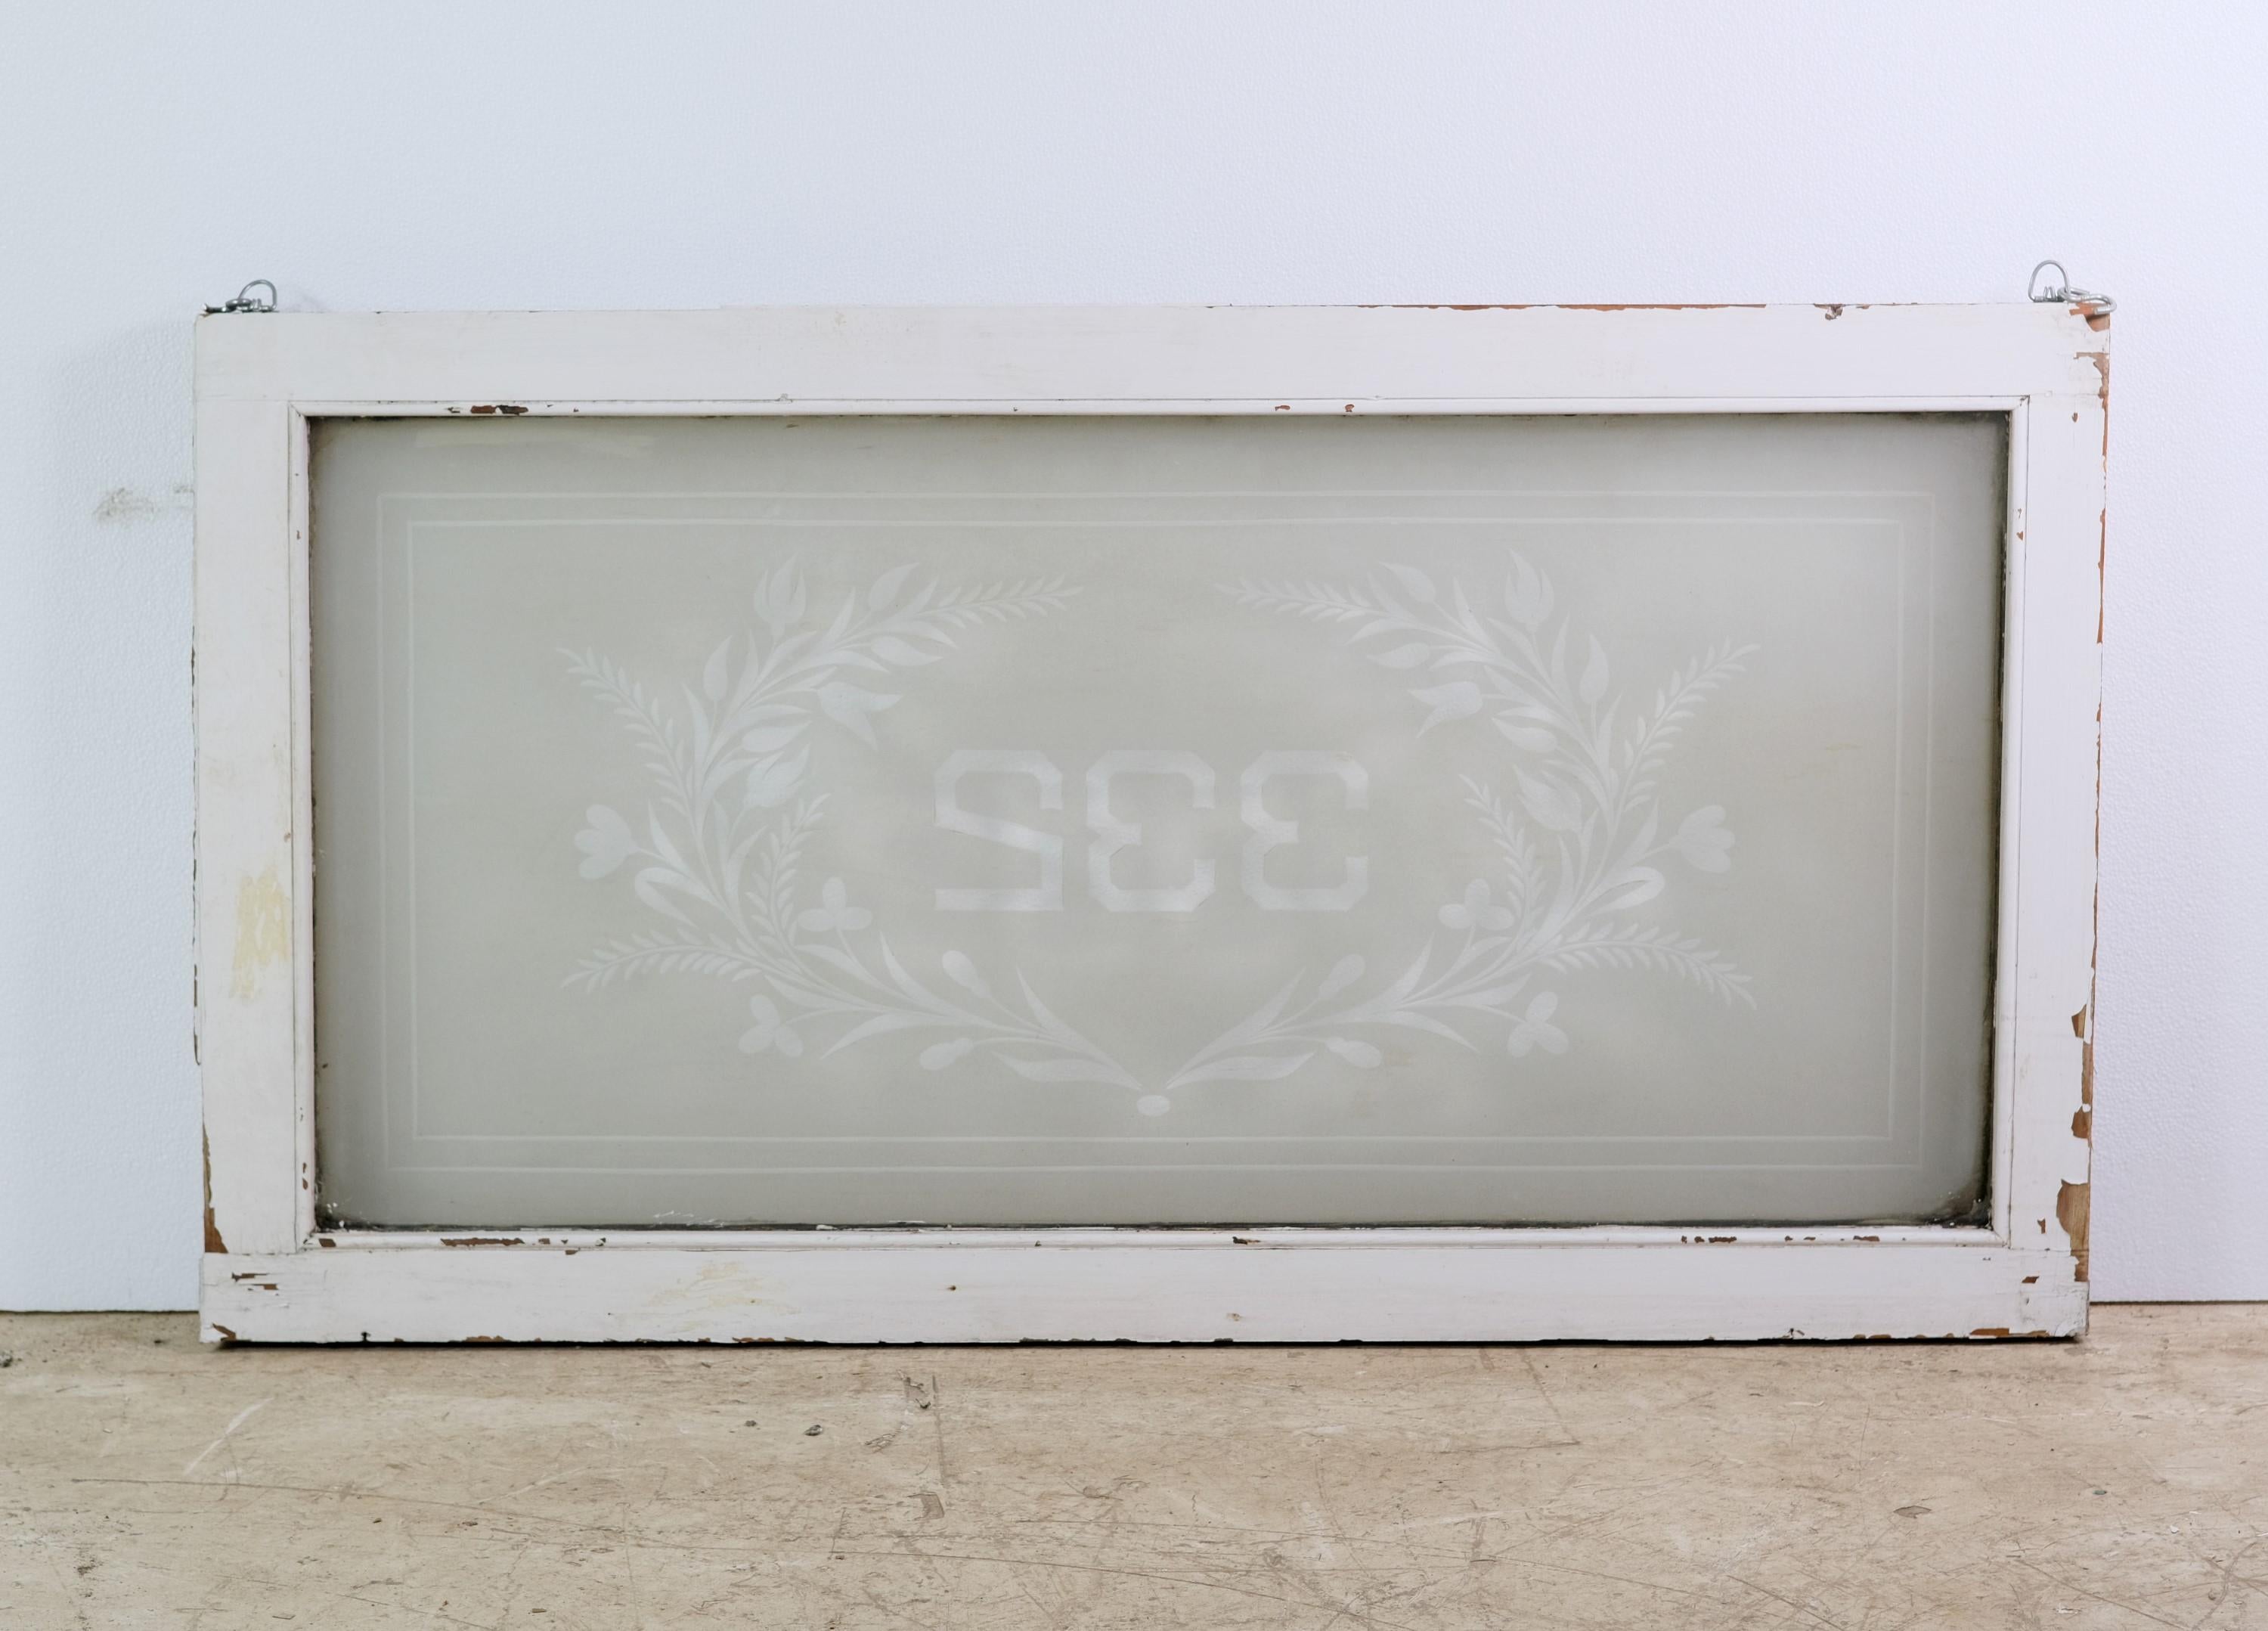 Victorian Antique Frosted Glass Transom Window w/ Etched Foliate Details, #332 House No.